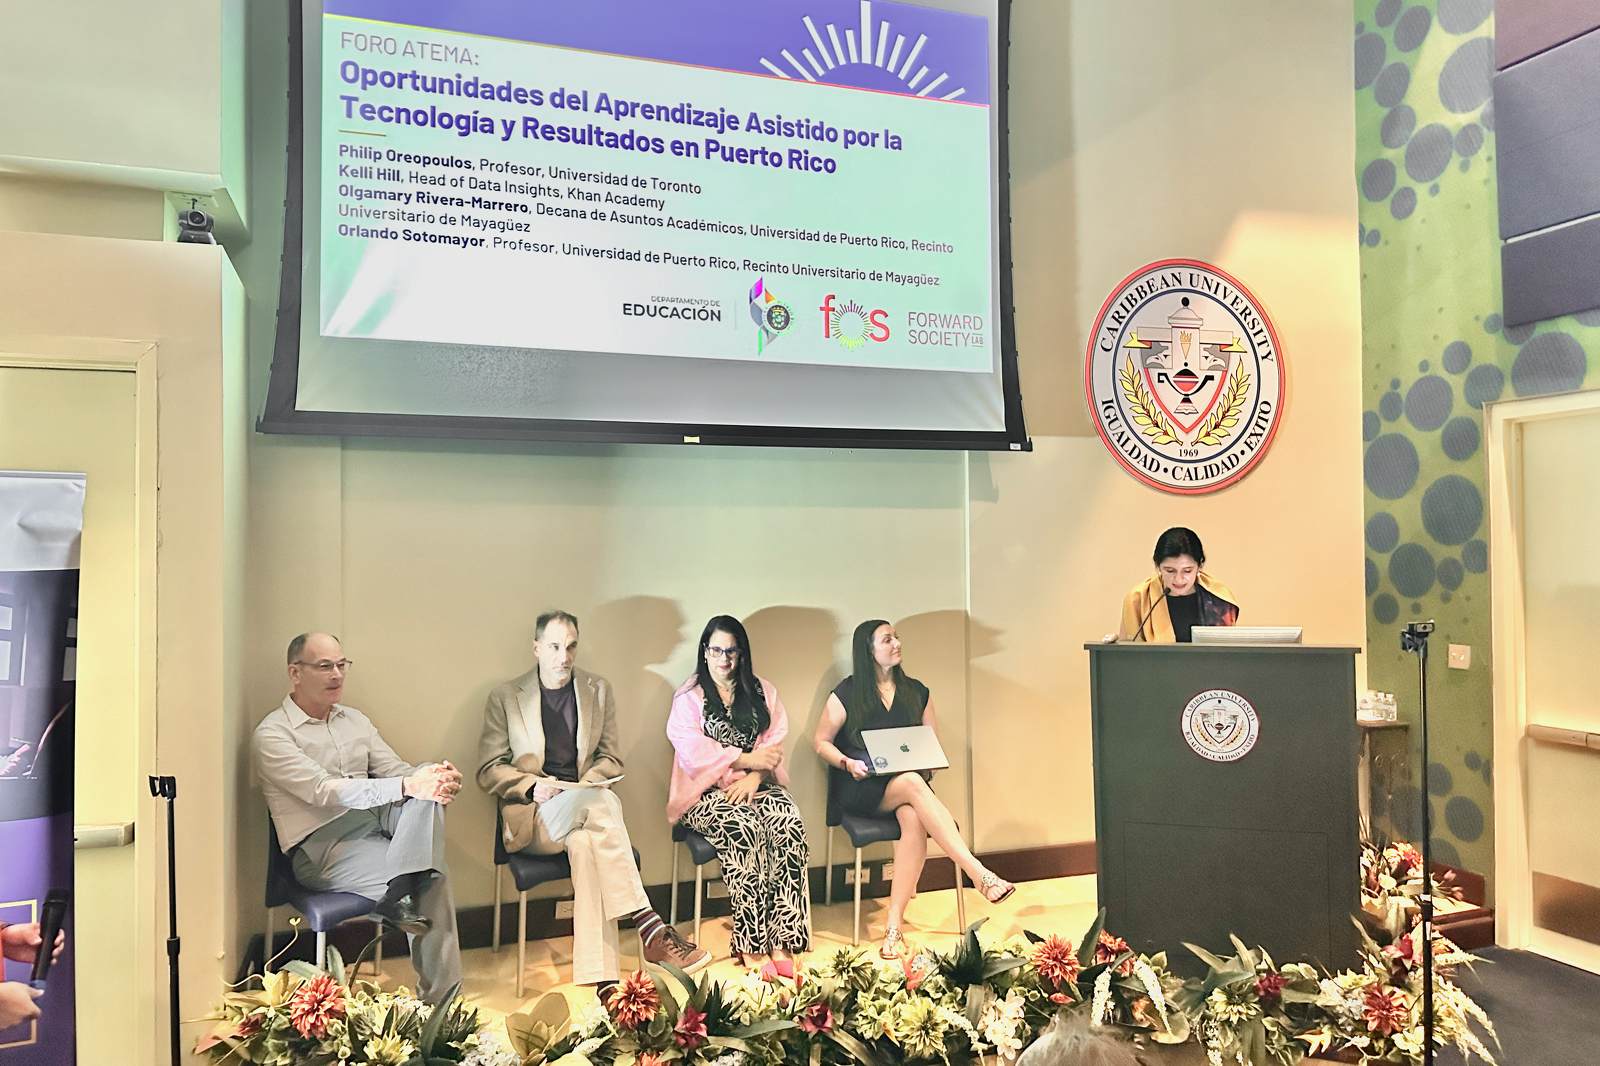 ATEMA Forum | Opportunities of Computer-Assisted Learning and Impacts in Puerto Rico